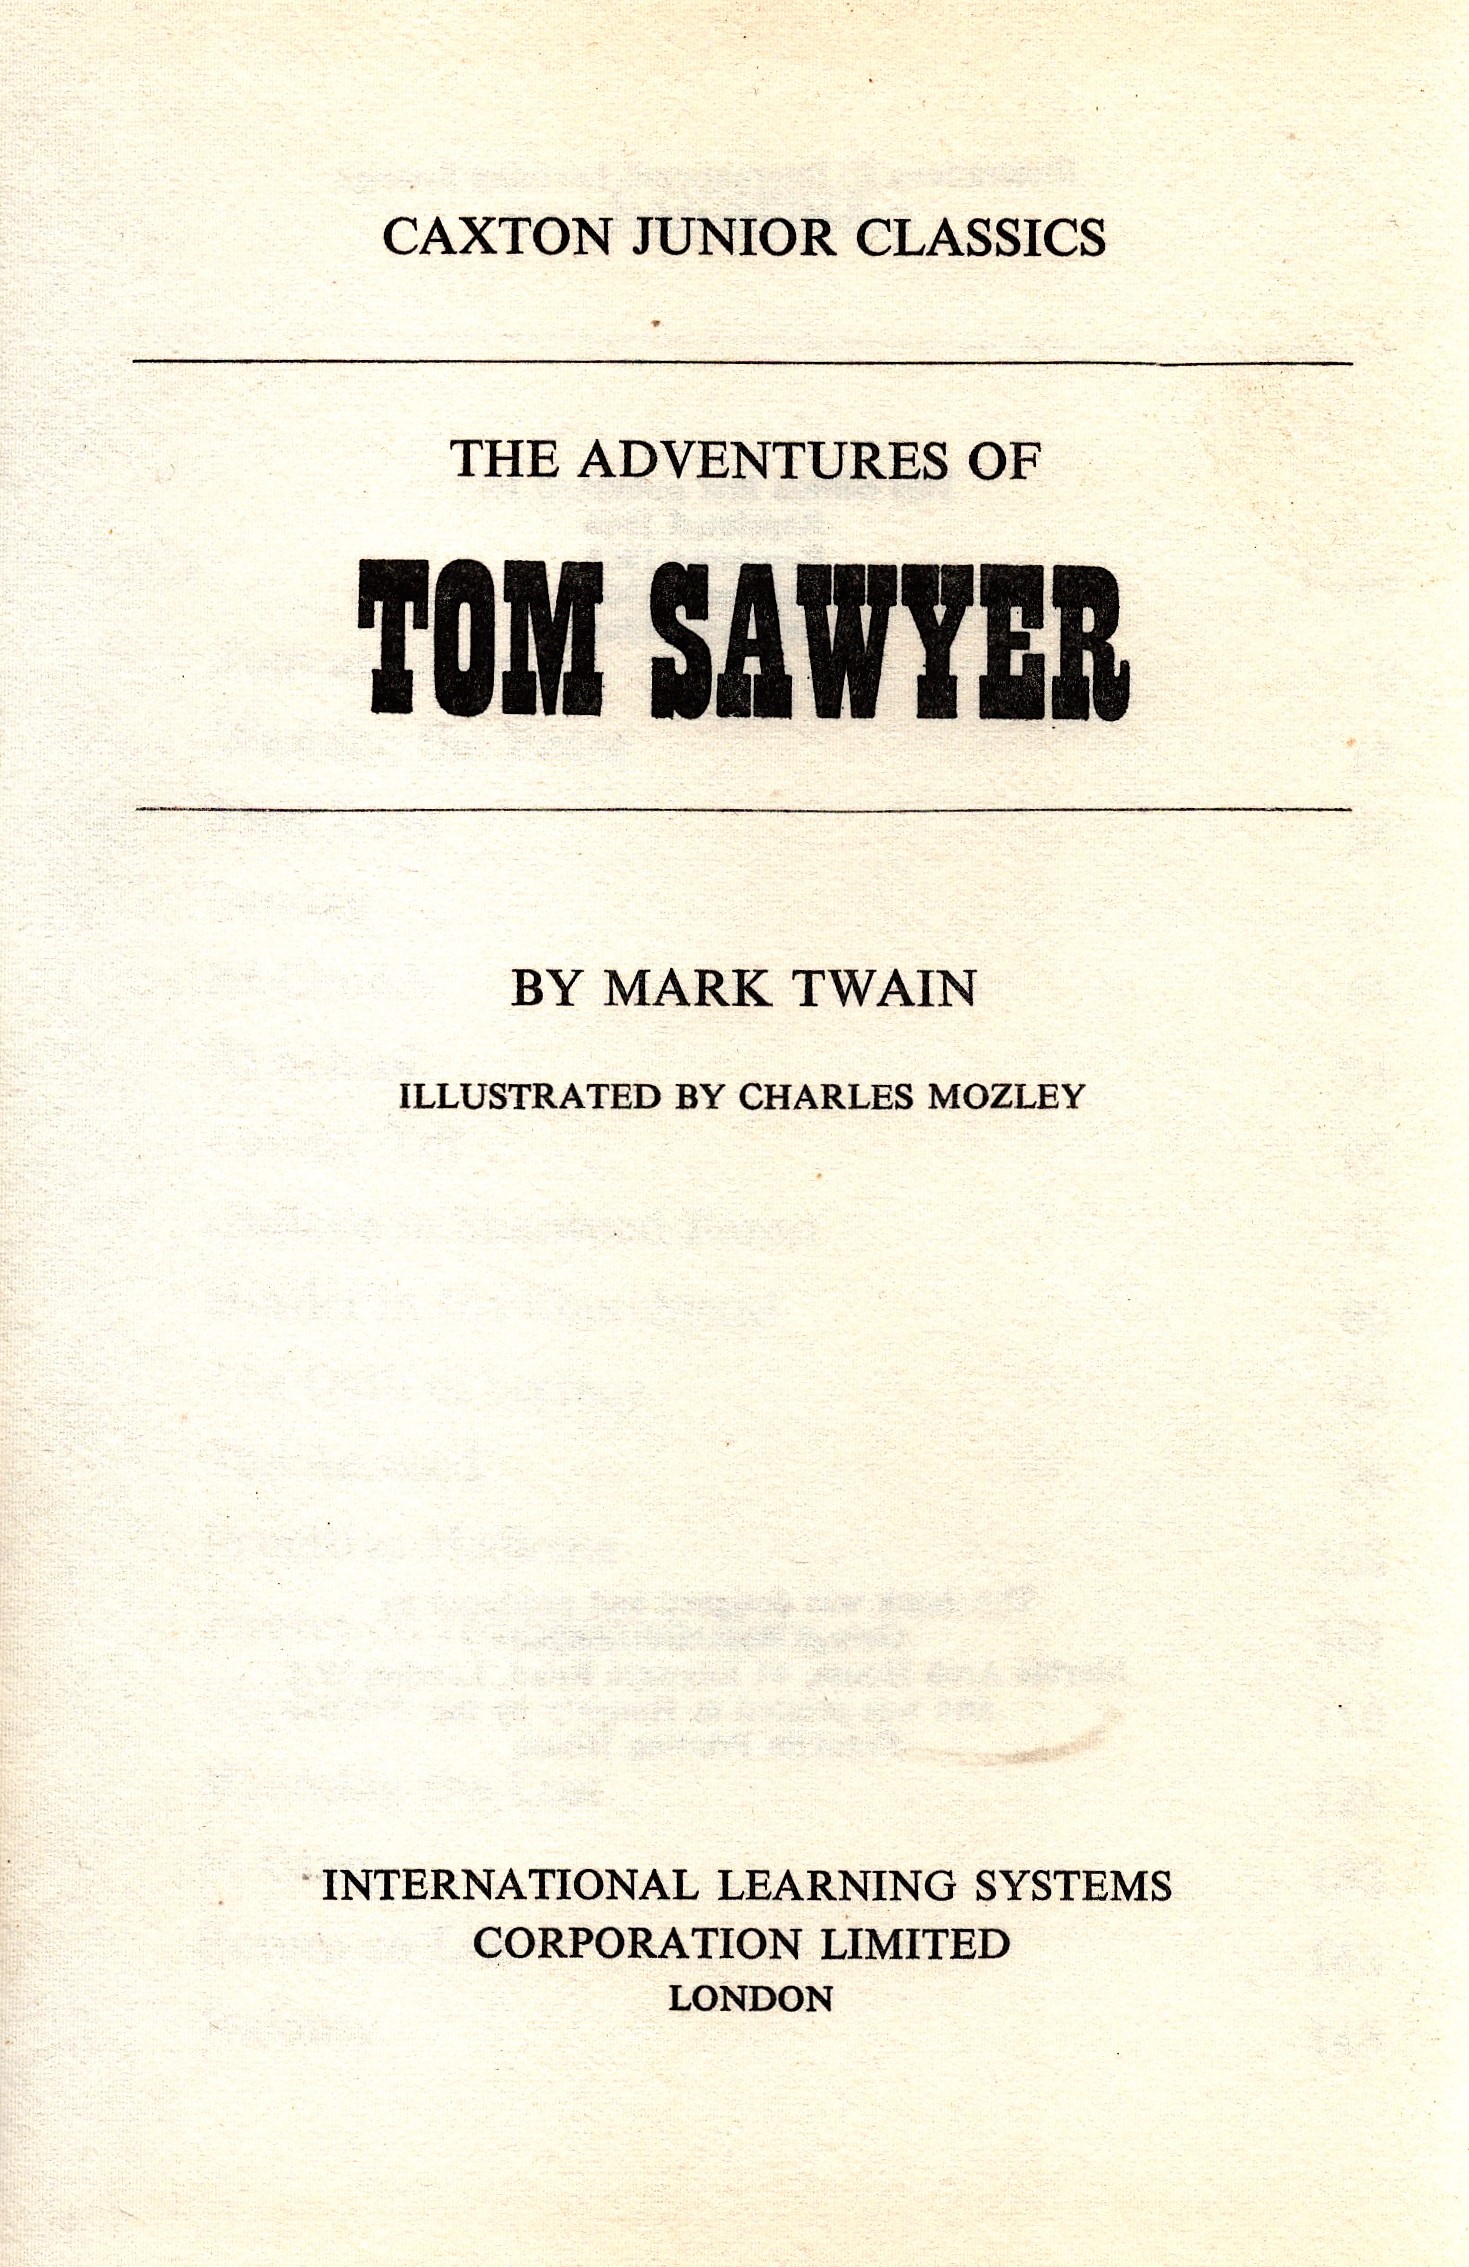 The Adventures of Tom Sawyer by Mark Twain Hardback Book 1968 Fifth Edition published by - Image 2 of 3